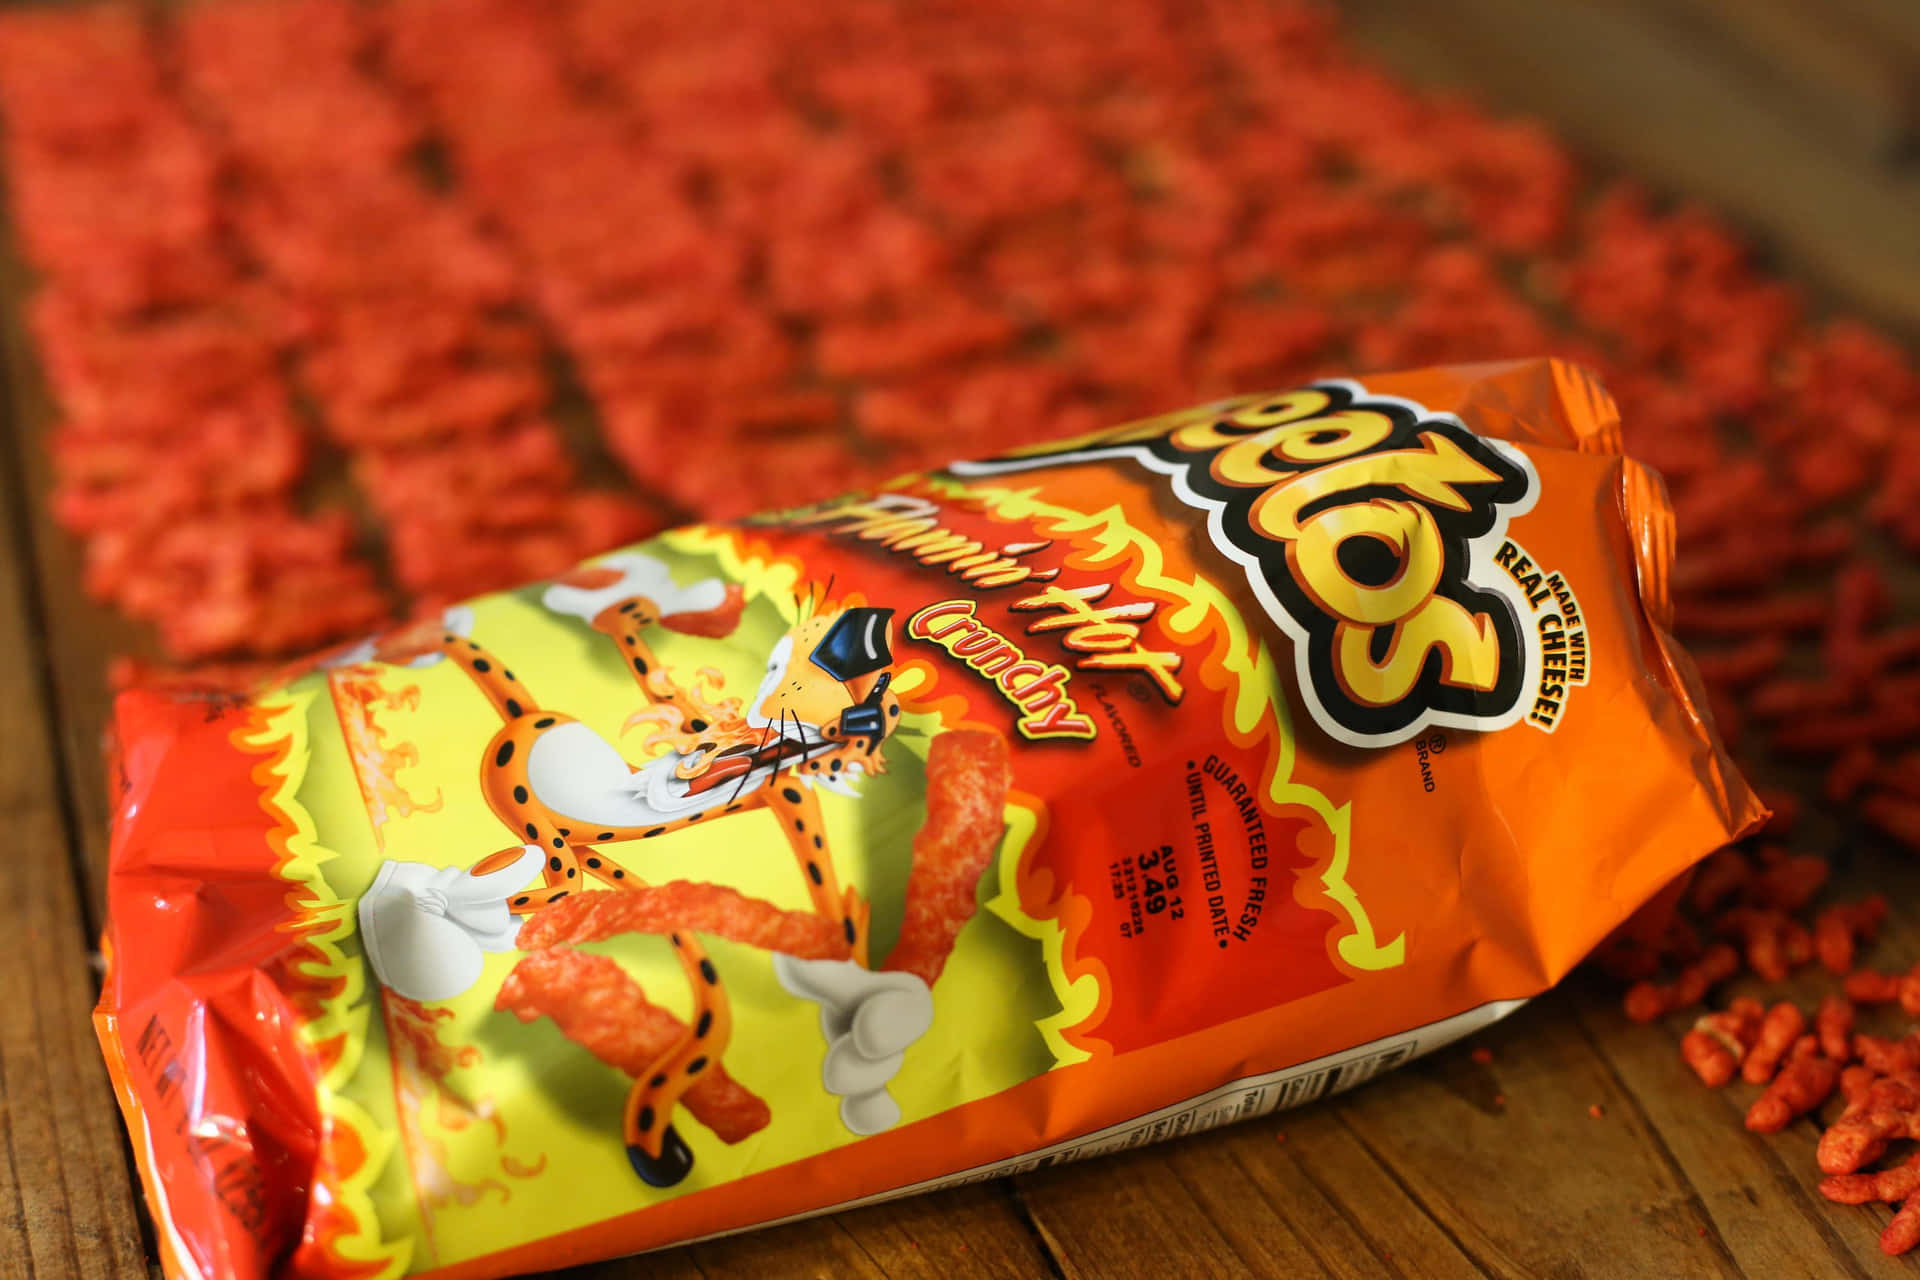 Indulge in the flavor of Hot Cheetos! Wallpaper